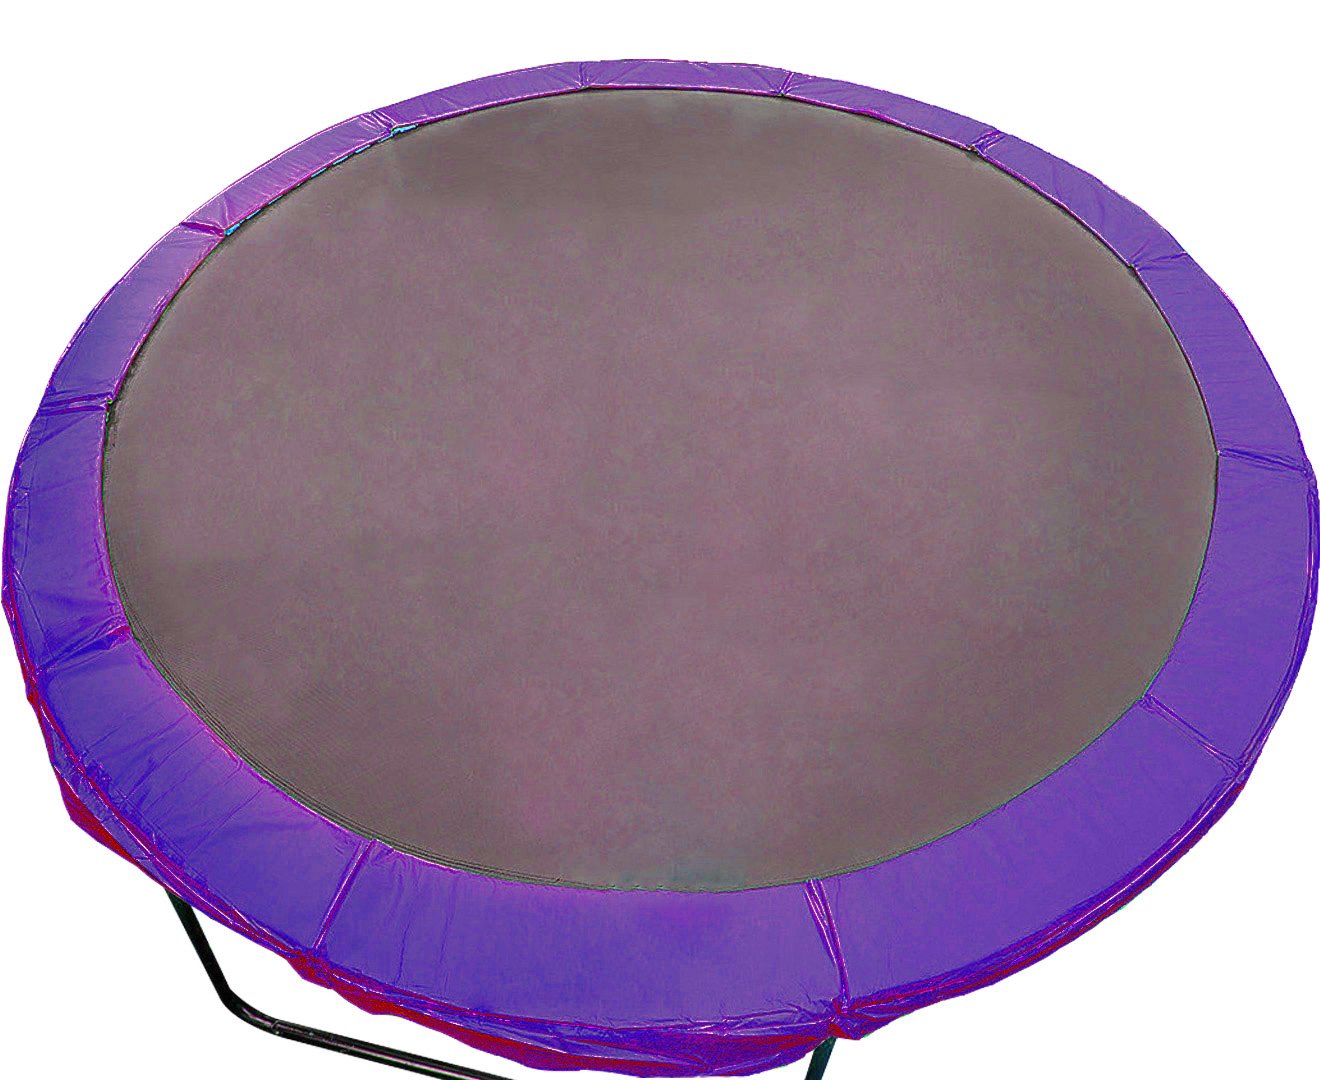 14ft Kahuna Trampoline Replacement Pad Purple